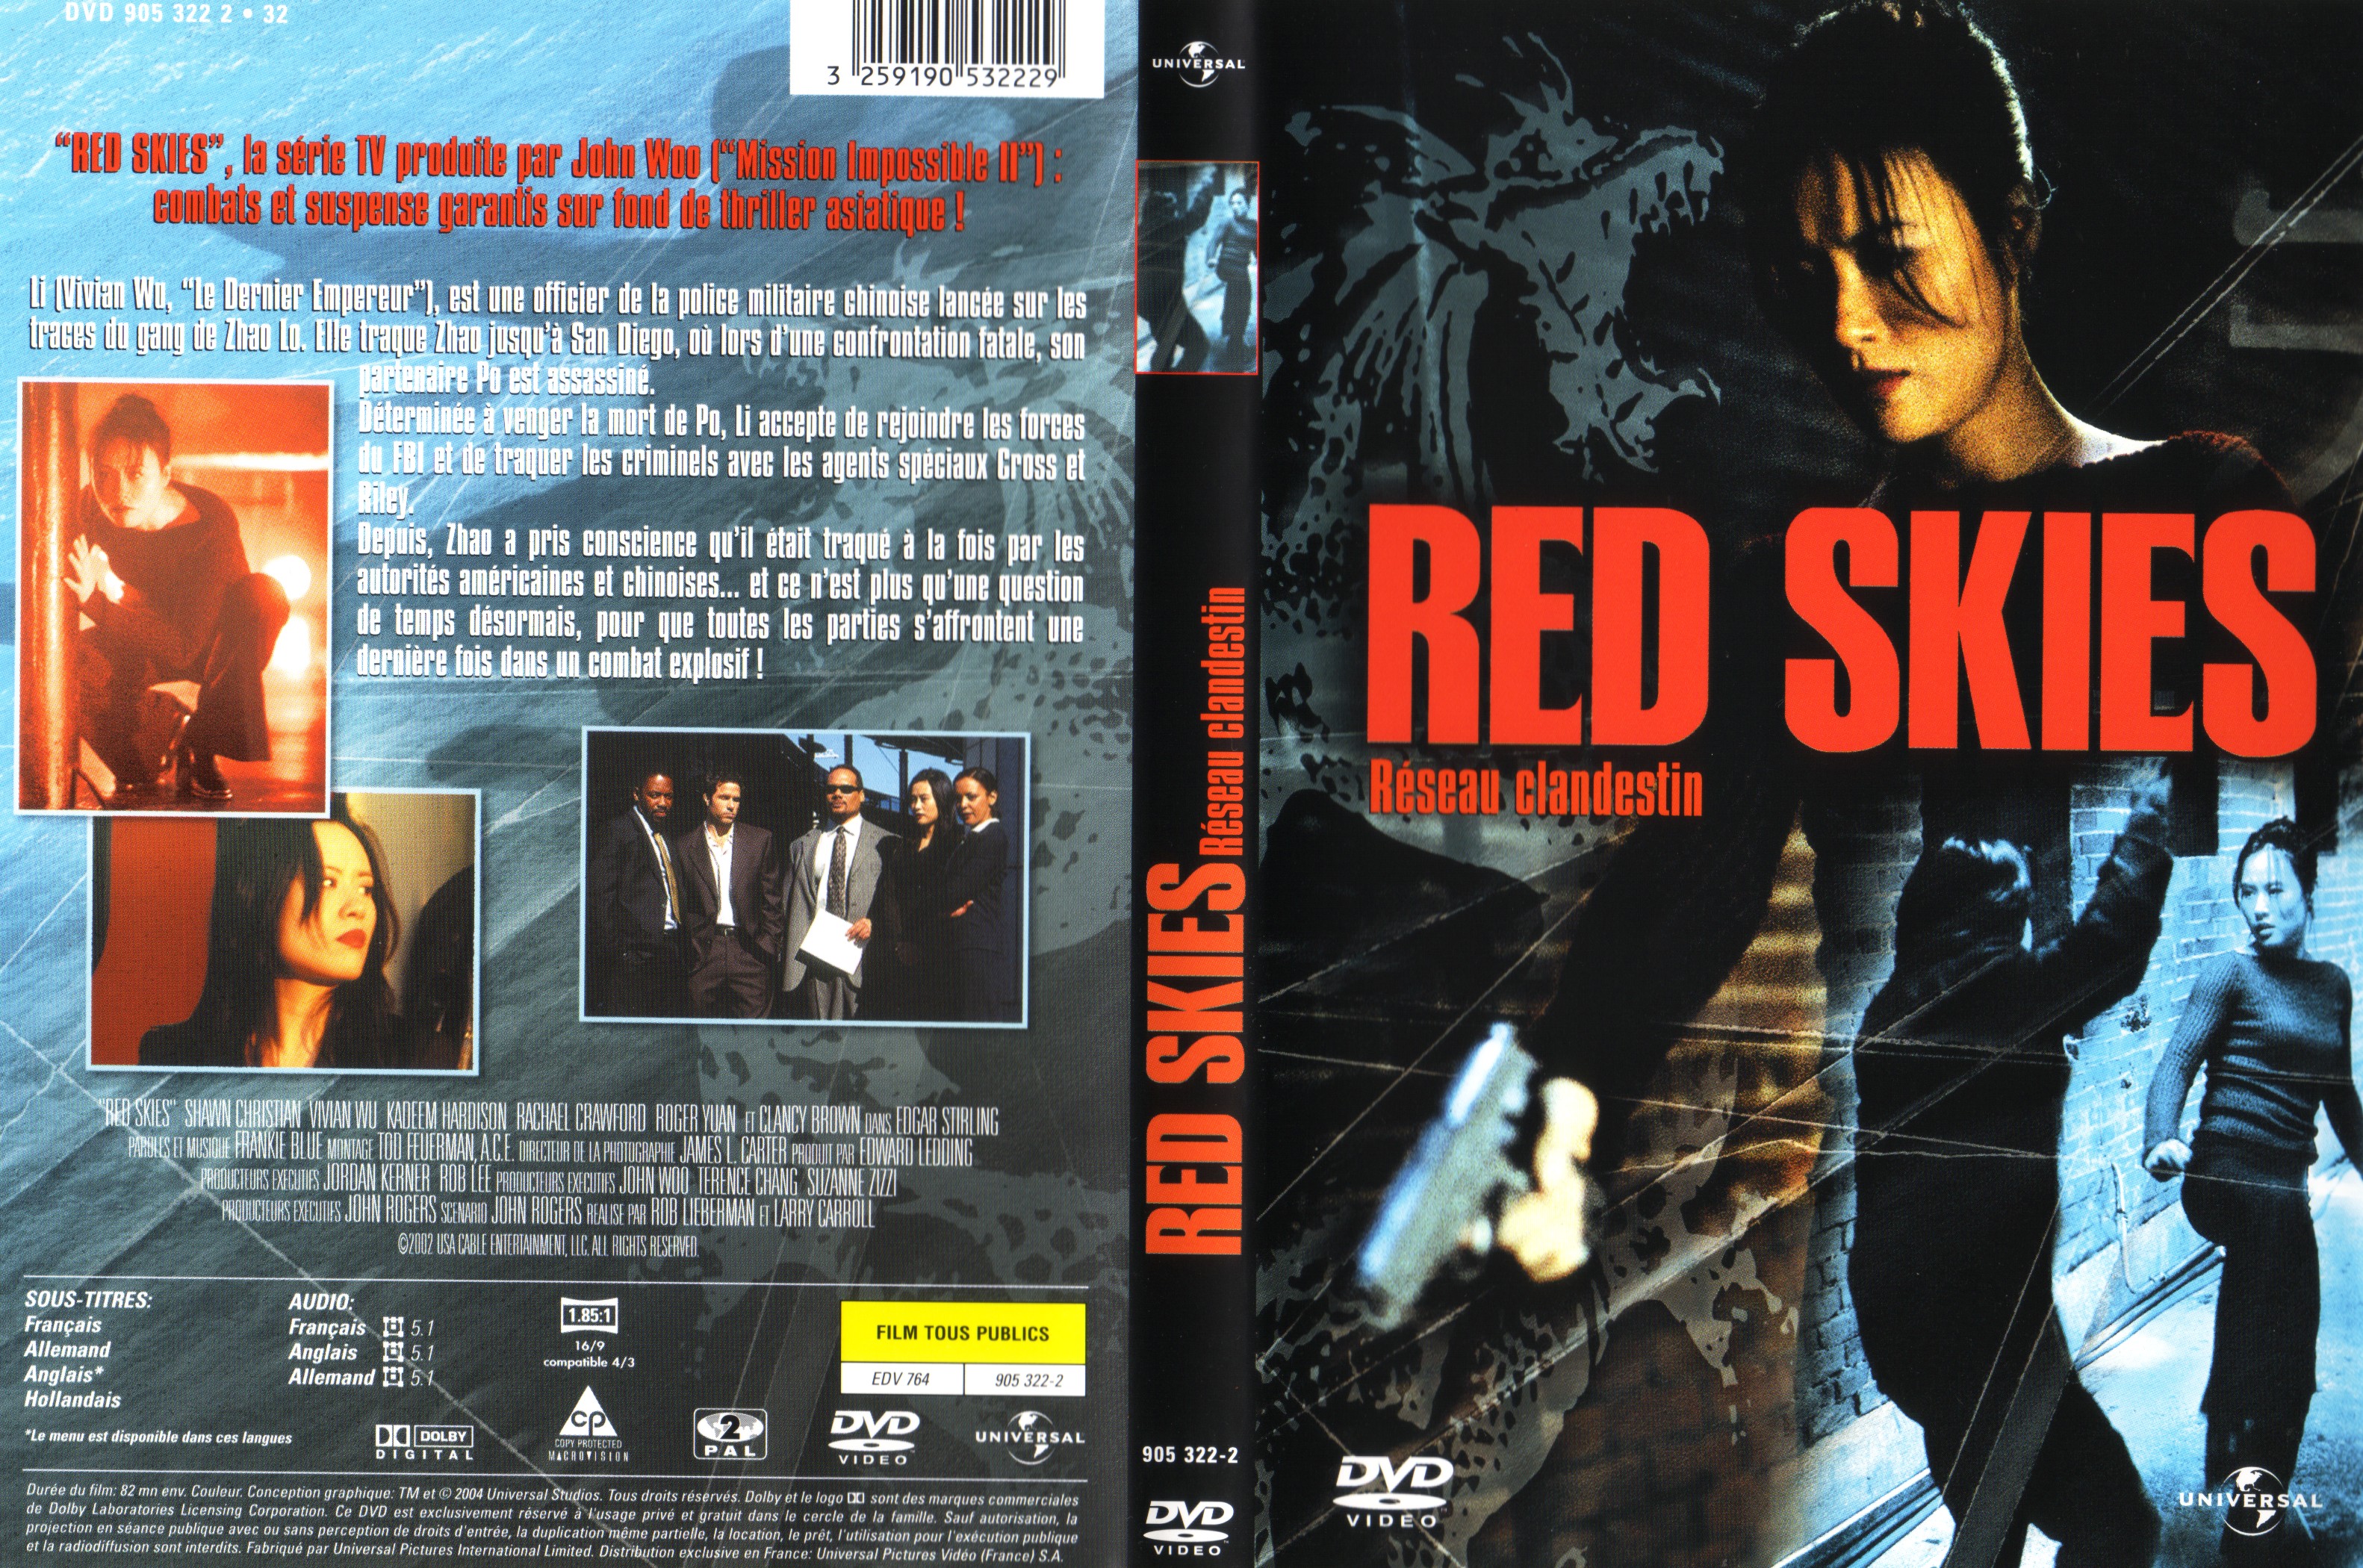 Jaquette DVD Red Skies v2